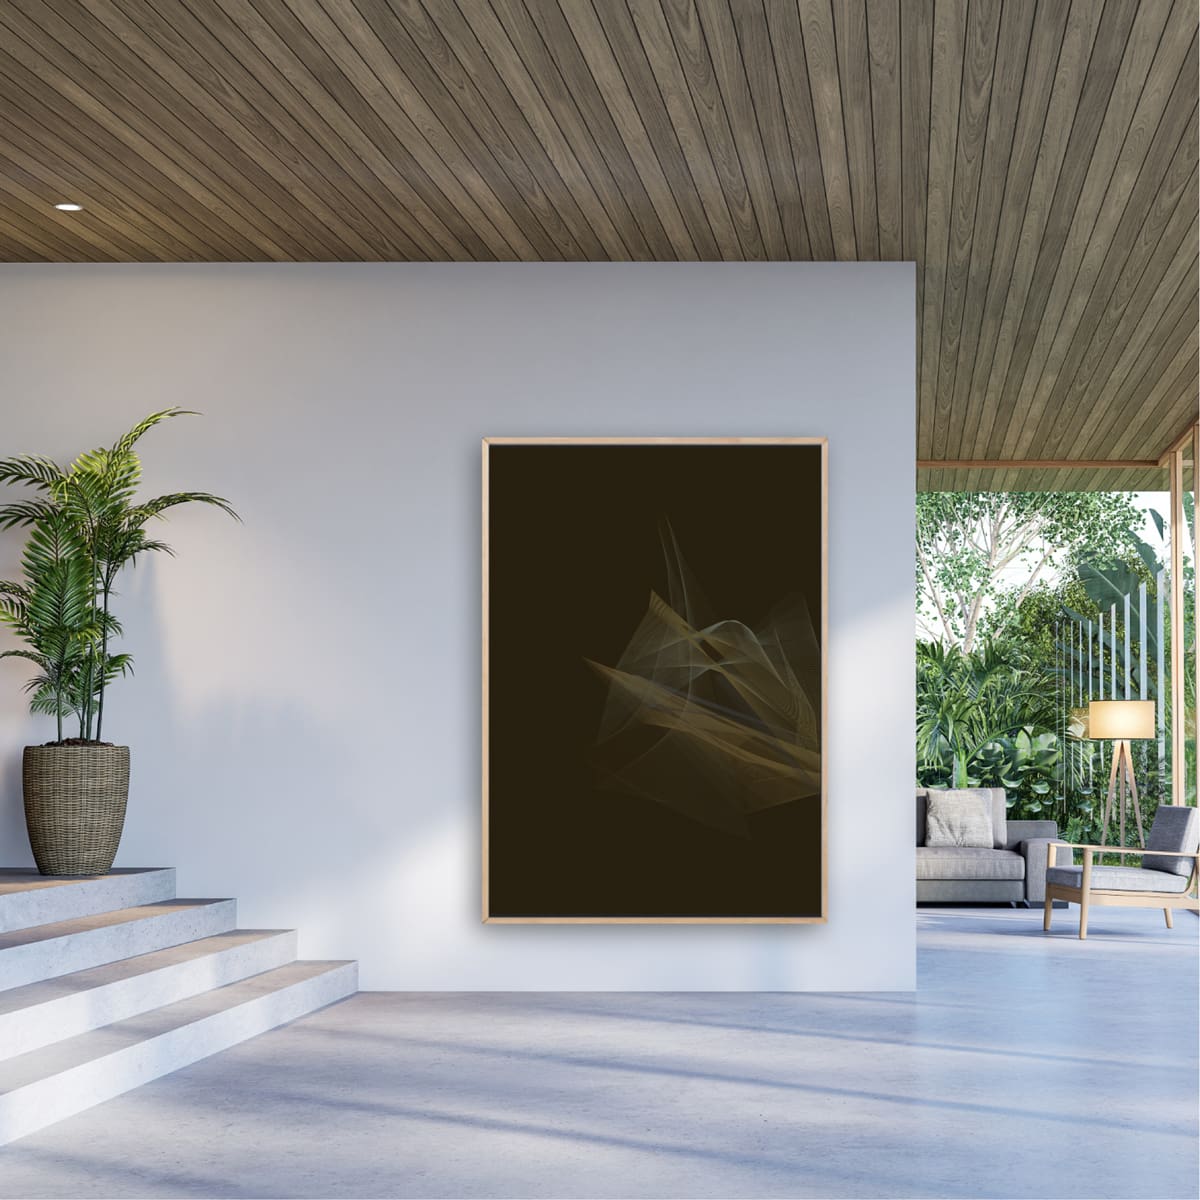 Dark Brown Accent fine art print in living room on white wall